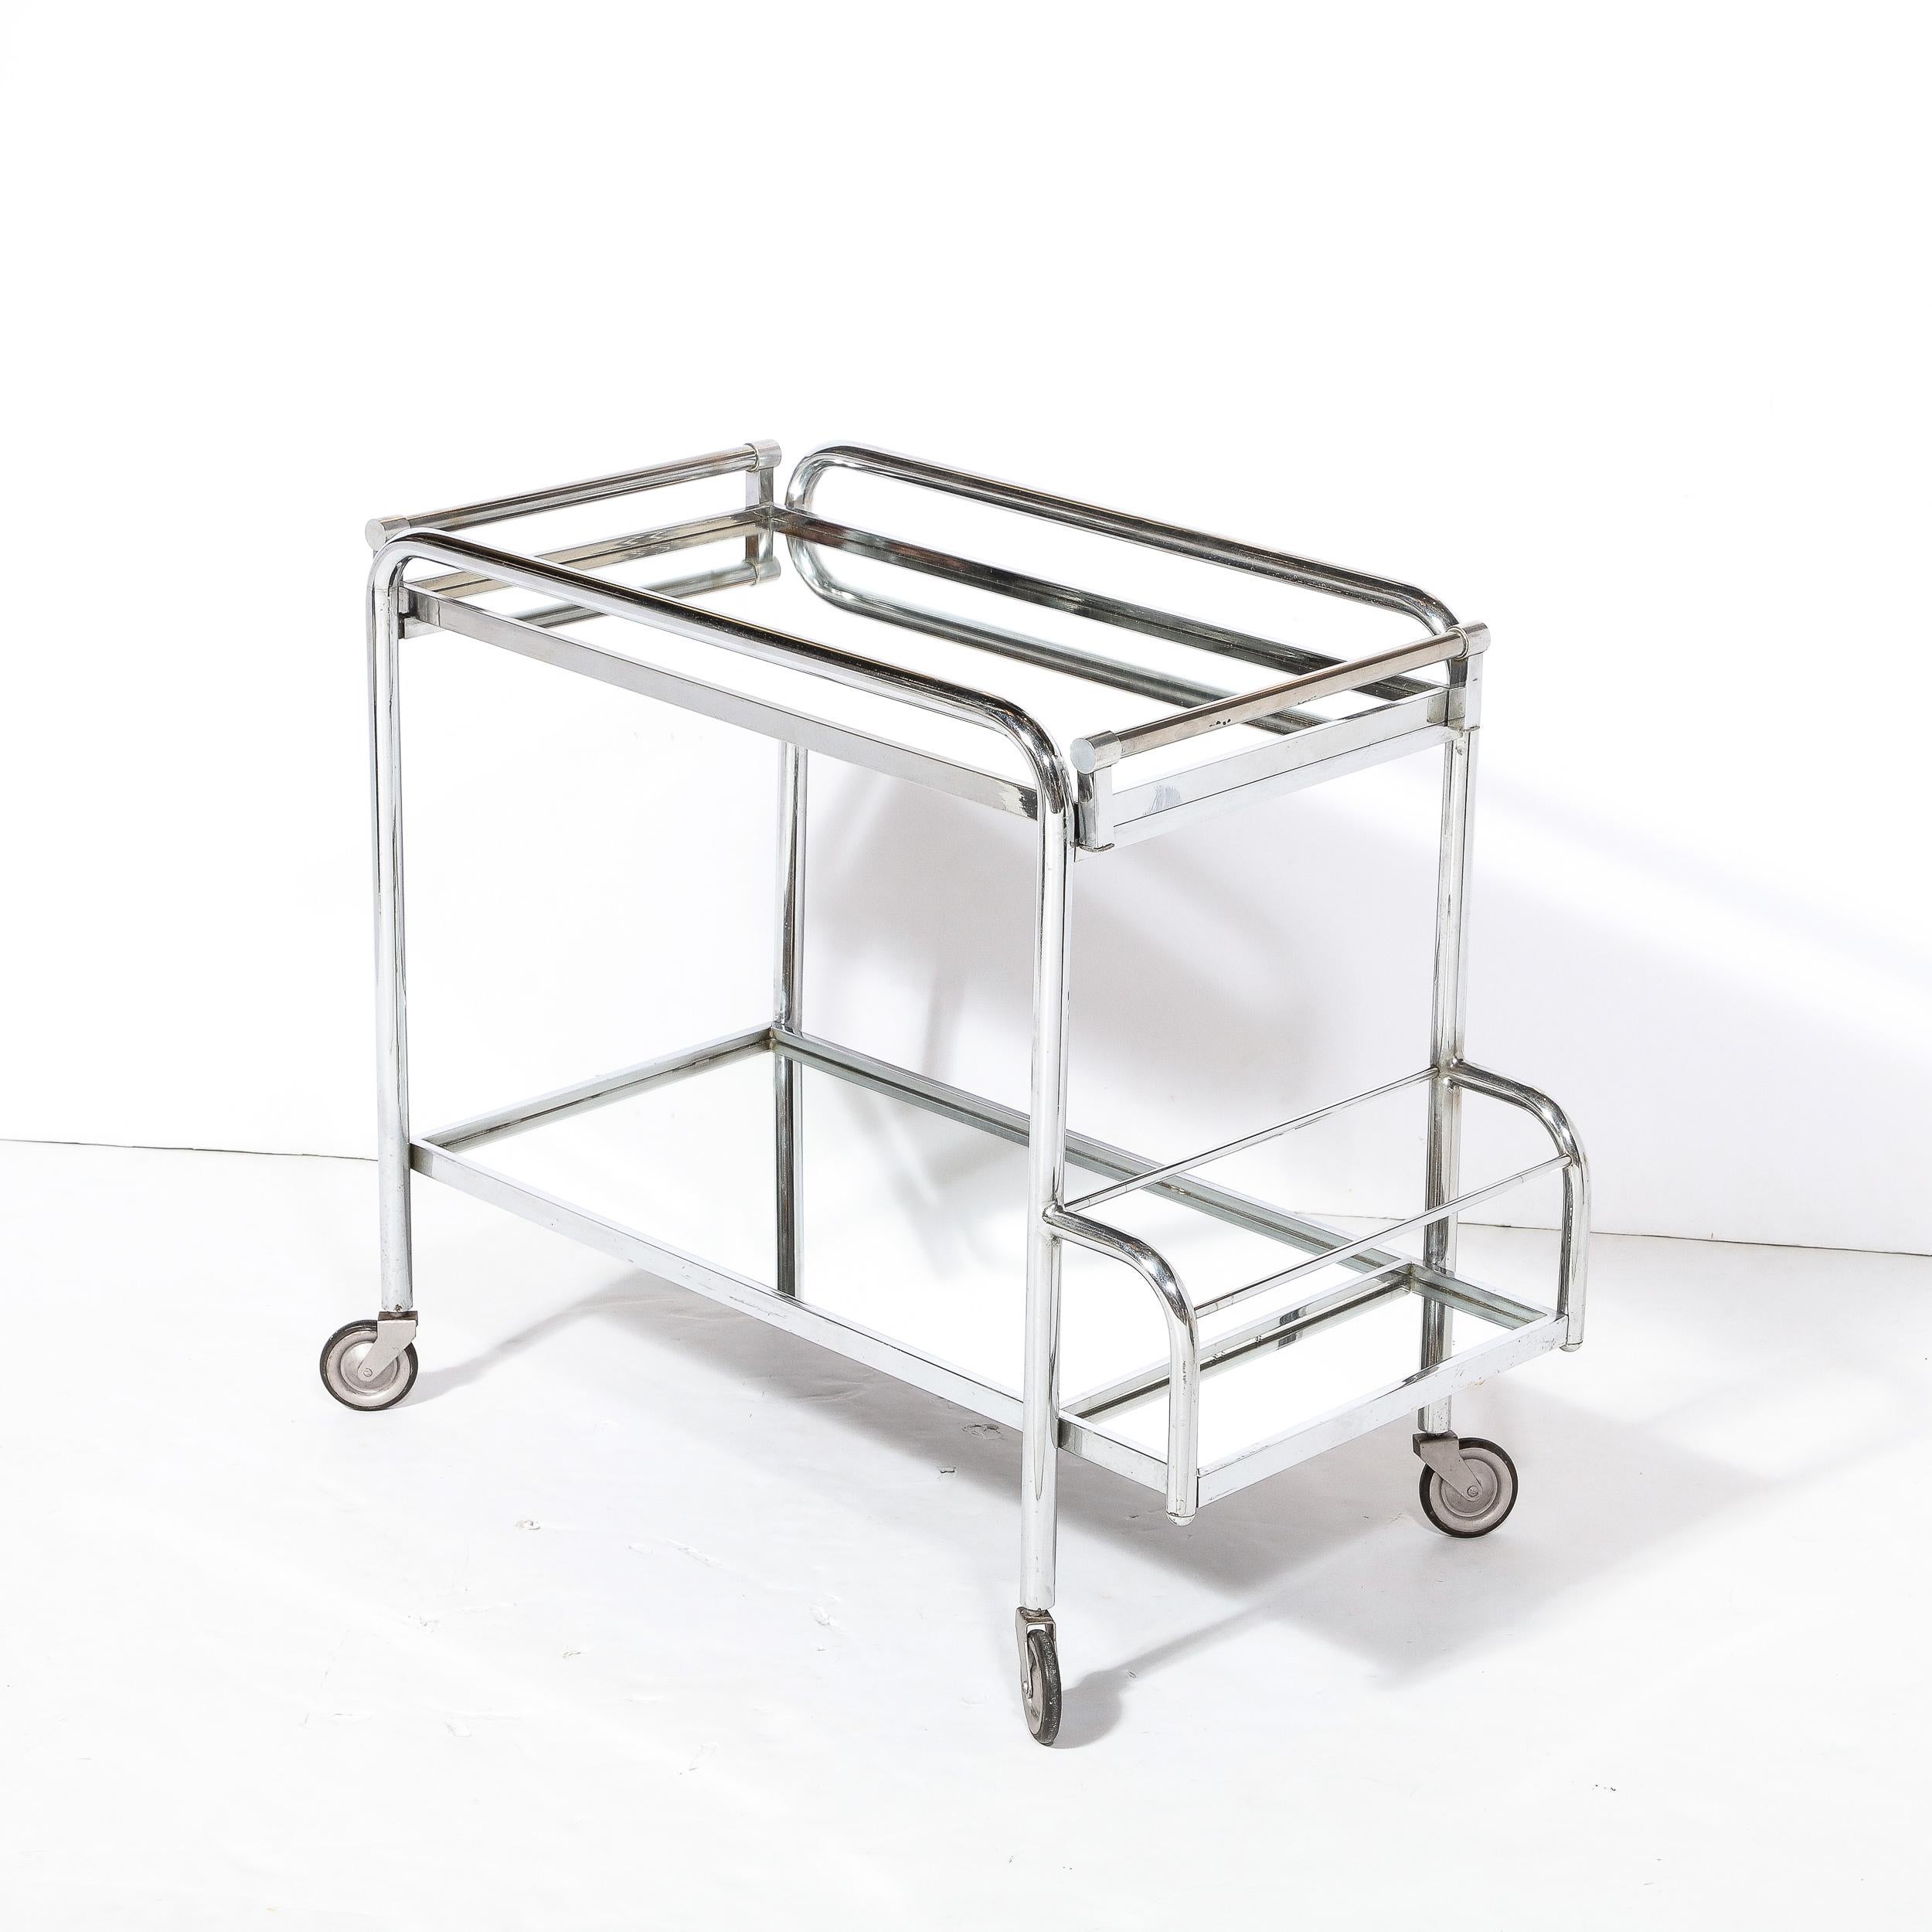 Art Deco Two-Tier Bar Cart in Polished Chrome and Mirror Glass by Jacques Adnet  For Sale 5